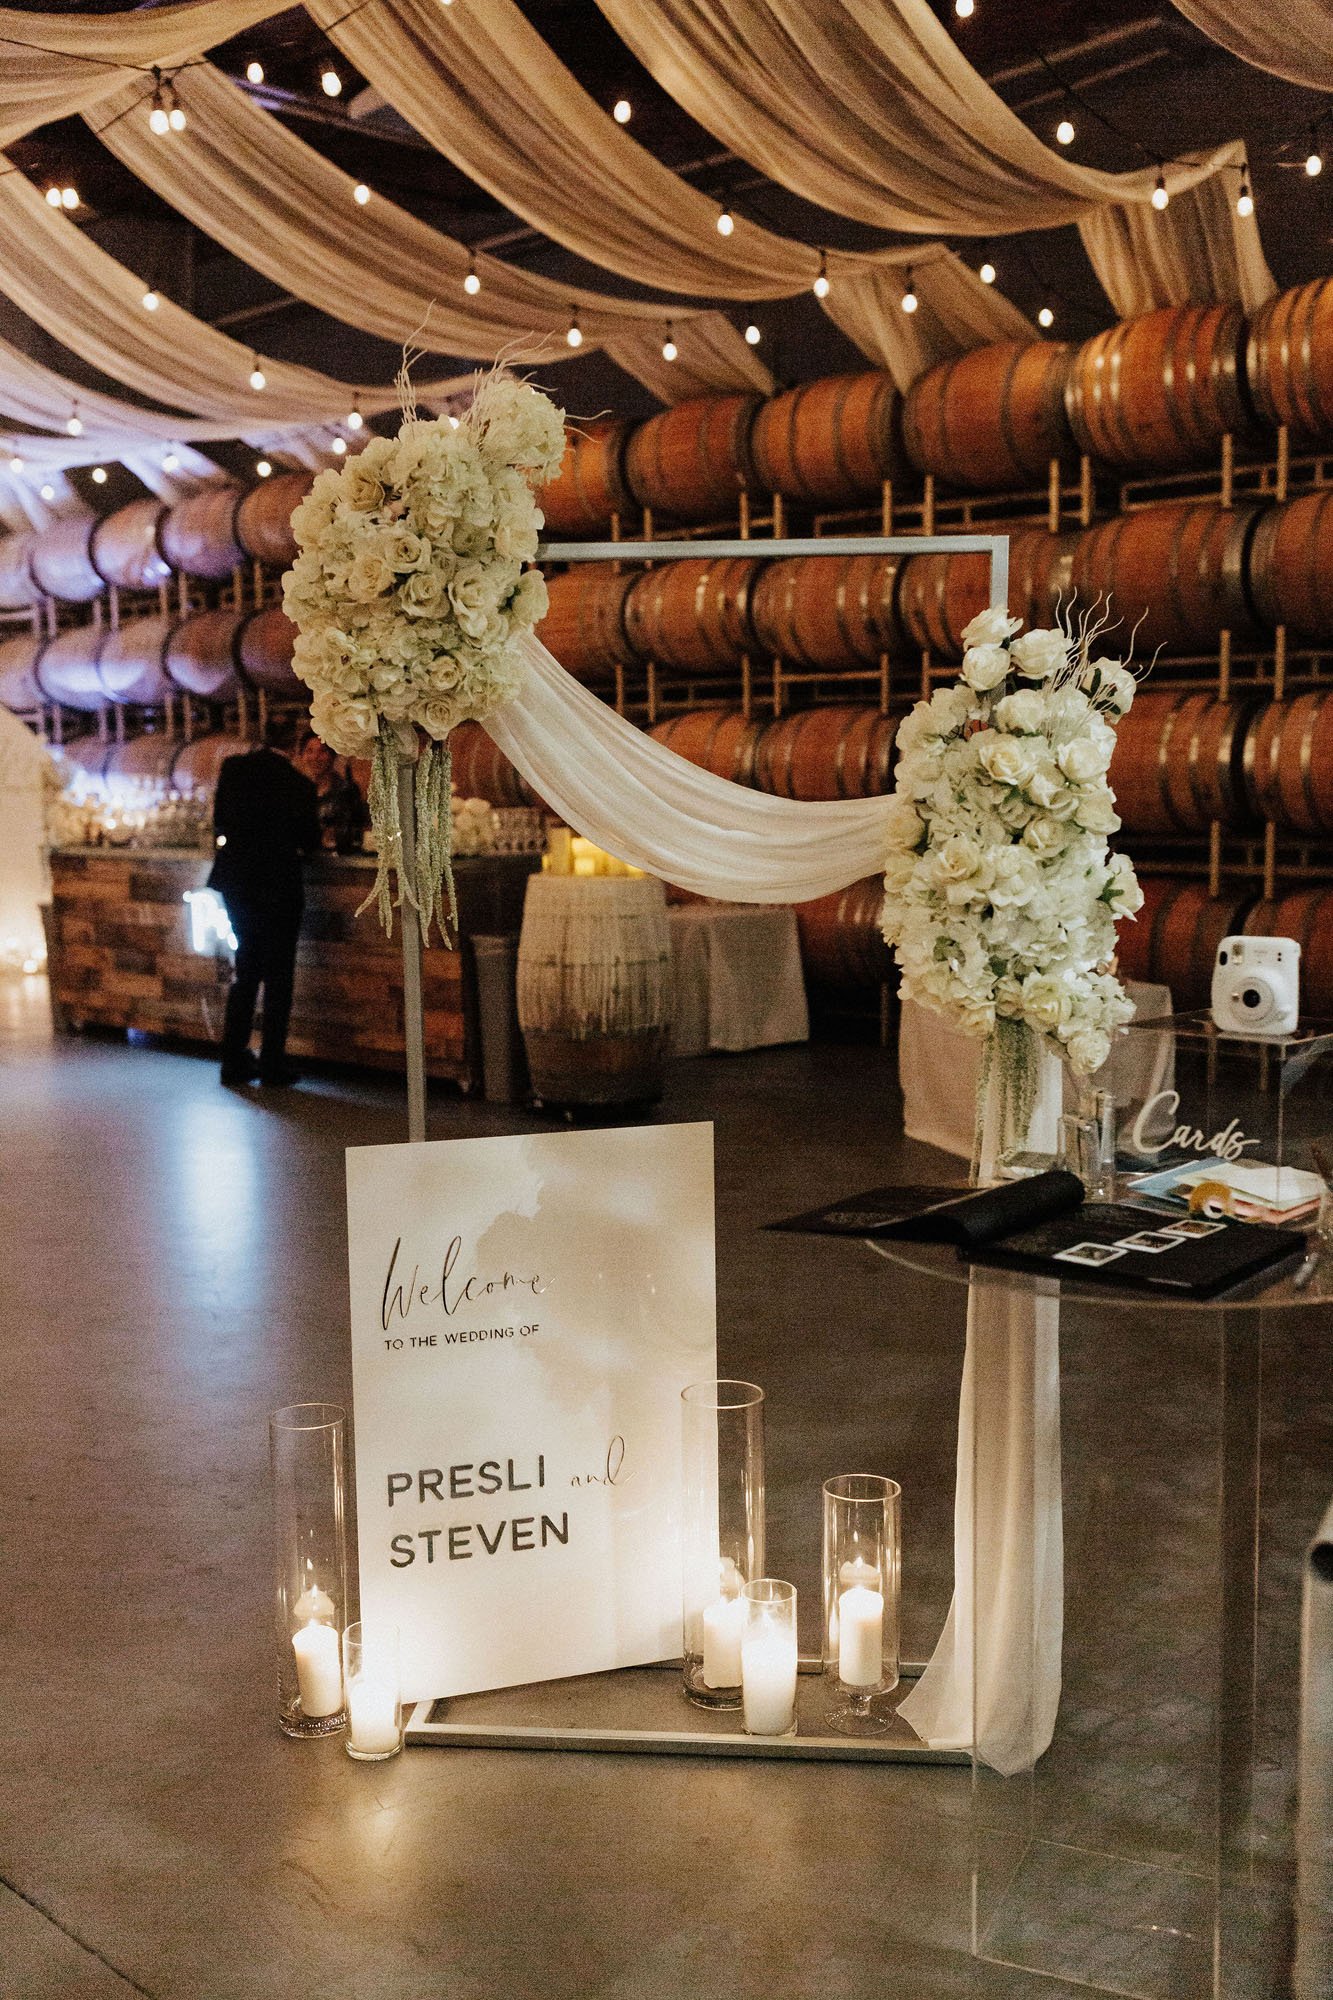  Photograph of a welcome table at a vineyard wedding in Washington. There is a floral installation with white roses, hydrangeas, and draped silk. There is a sign on the ground that reads “Welcome to the wedding of Presli and Steven” that is surrounde